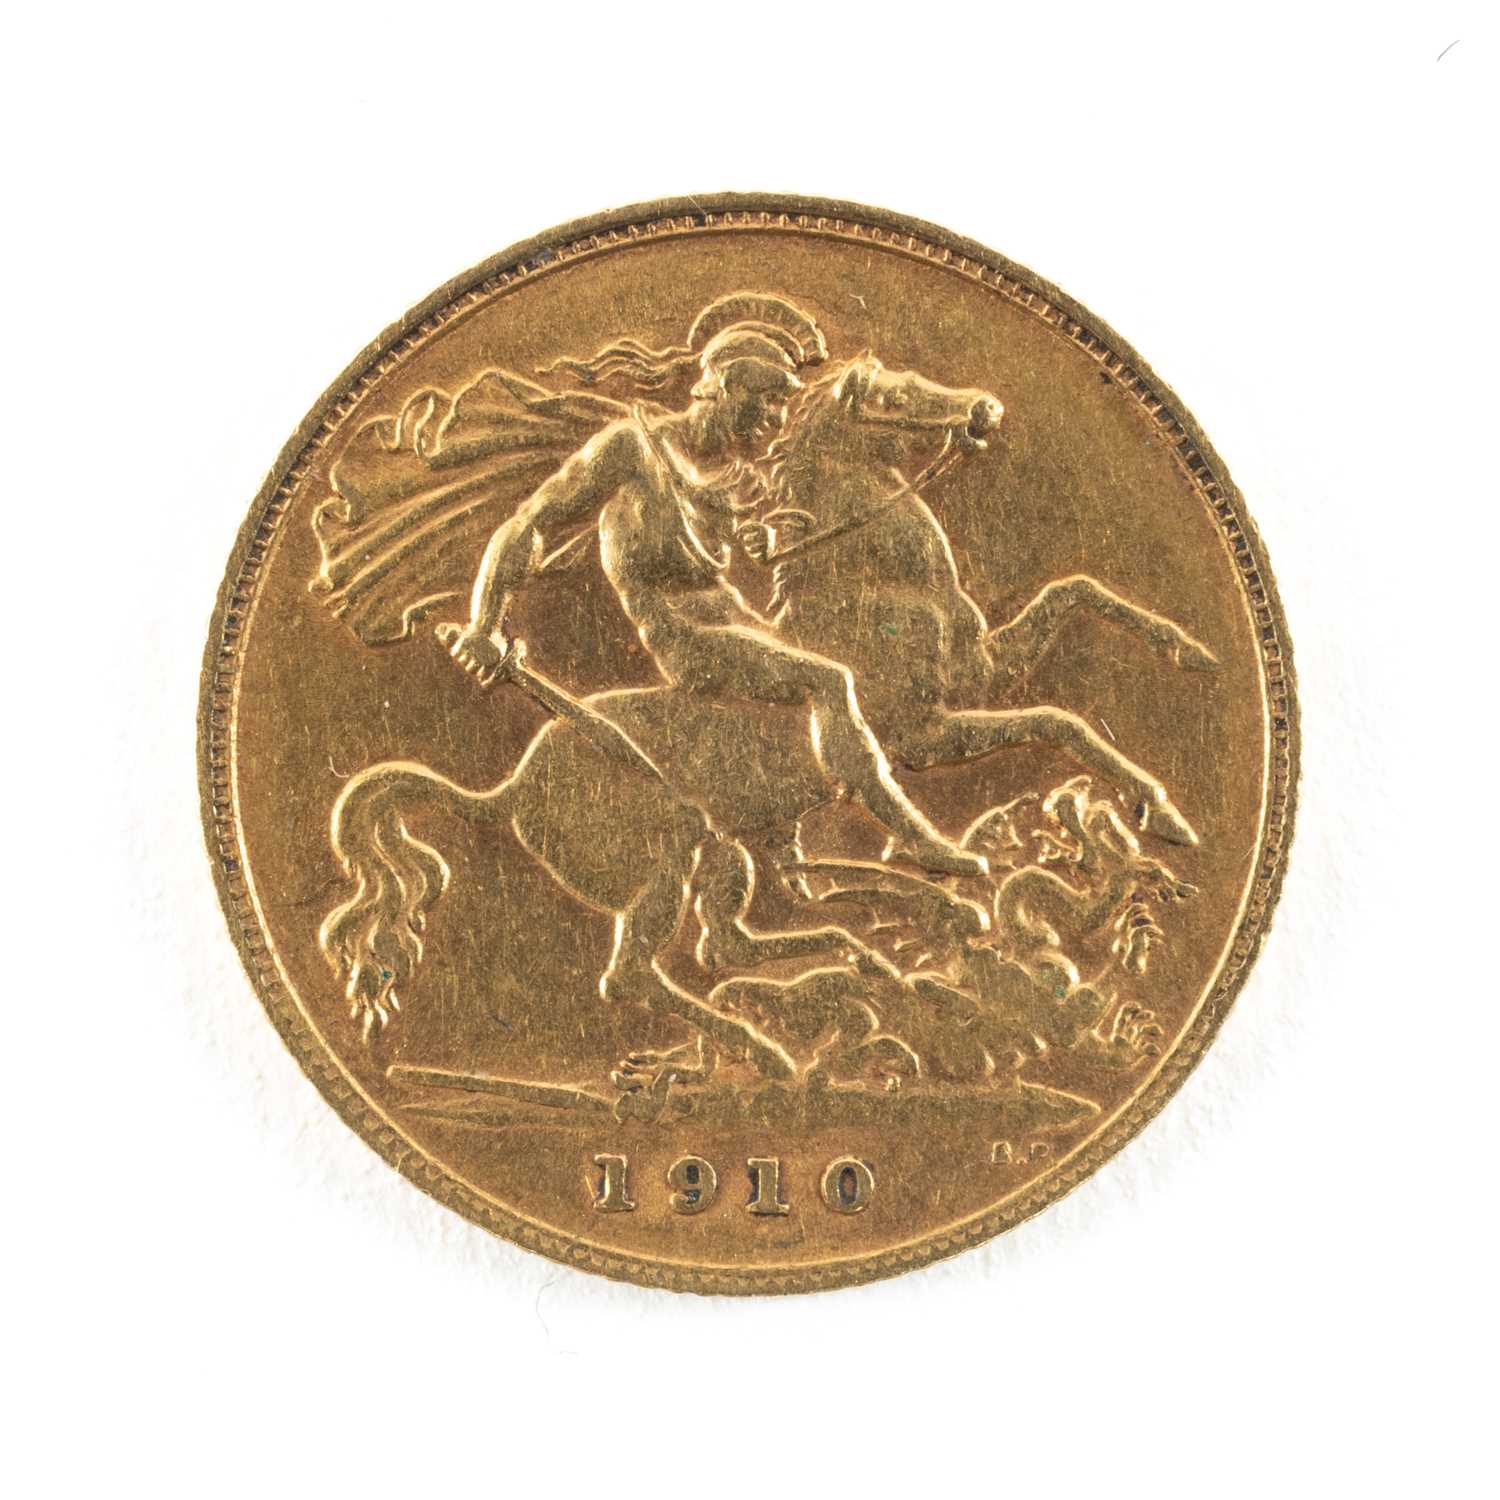 EDWARD VII GOLD HALF SOVEREIGN, 1910, 4g Provenance: private collection Cardiff